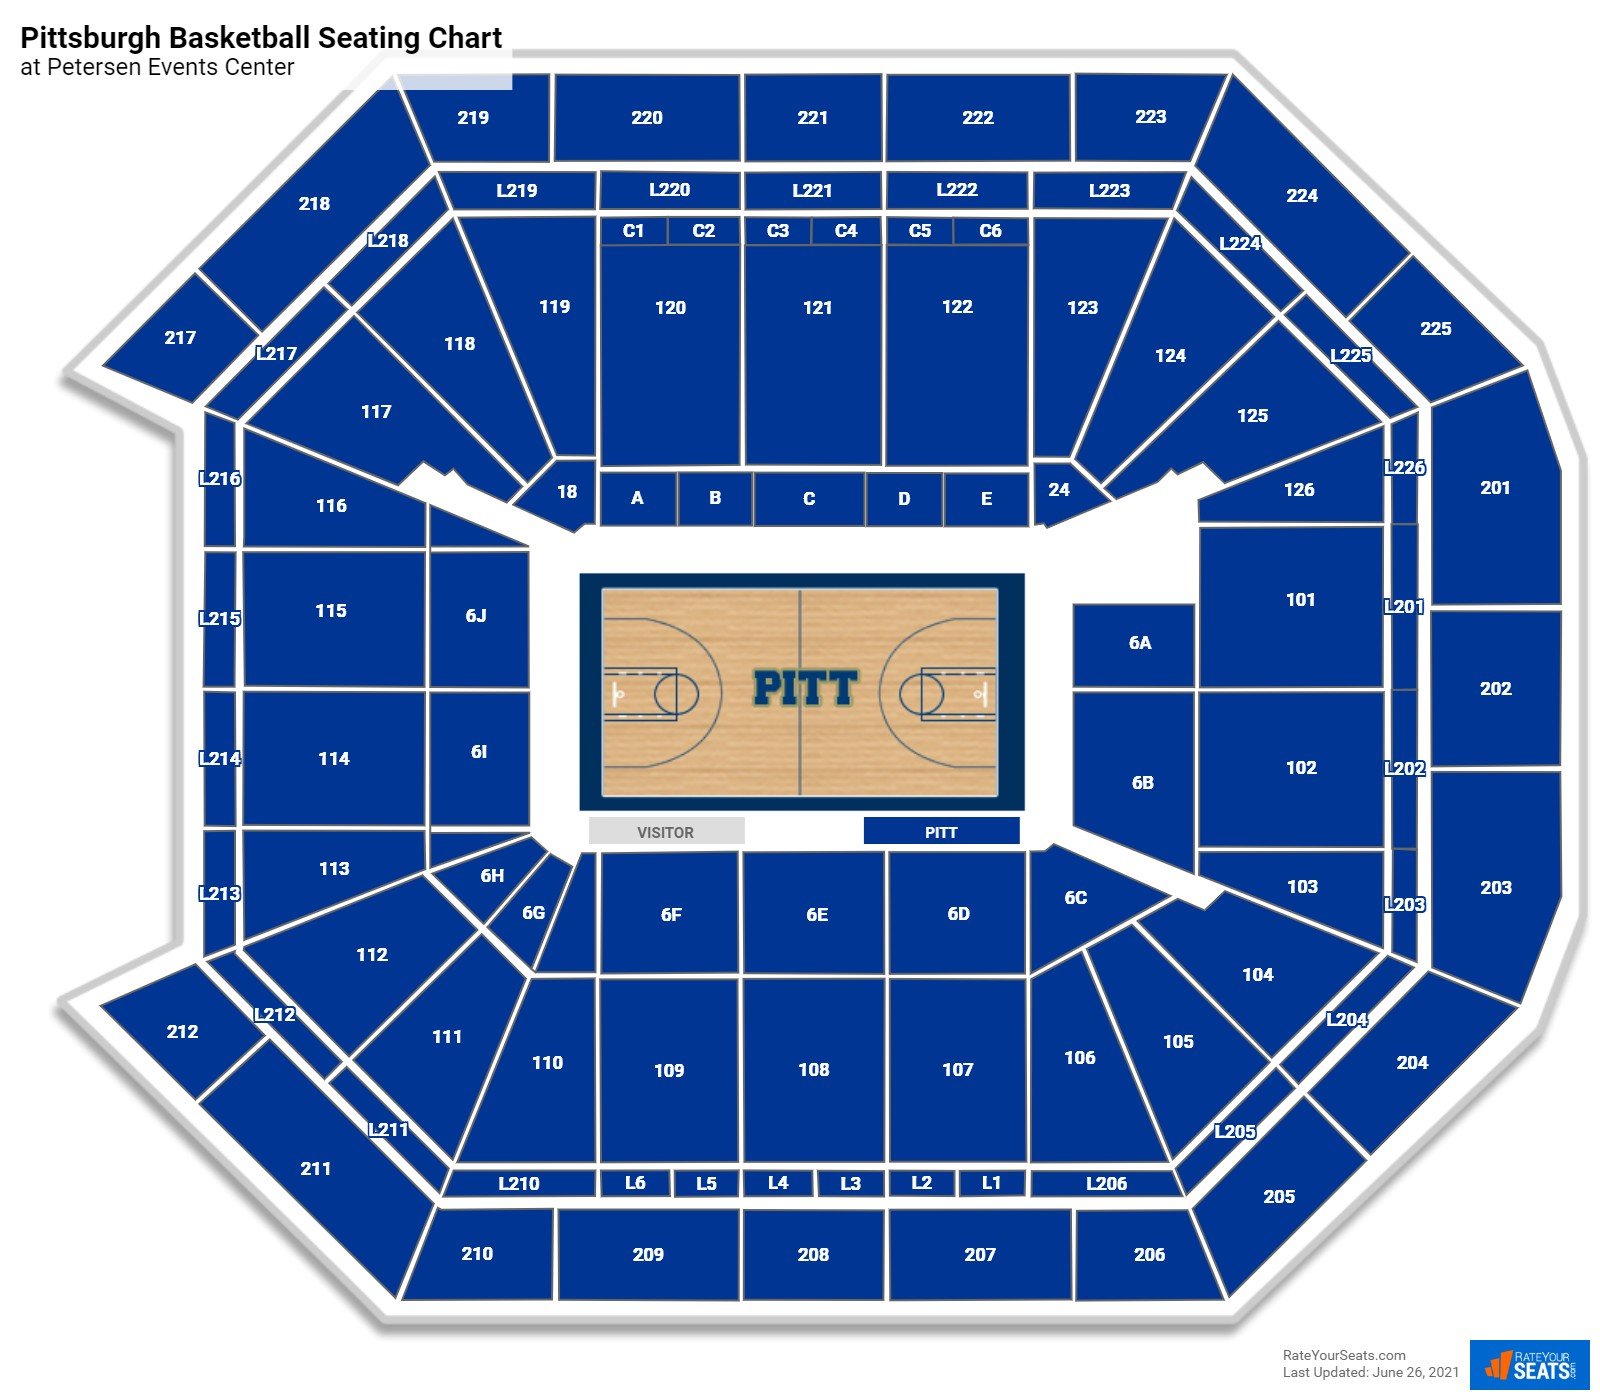 Pittsburgh Panthers Seating Chart at Petersen Events Center